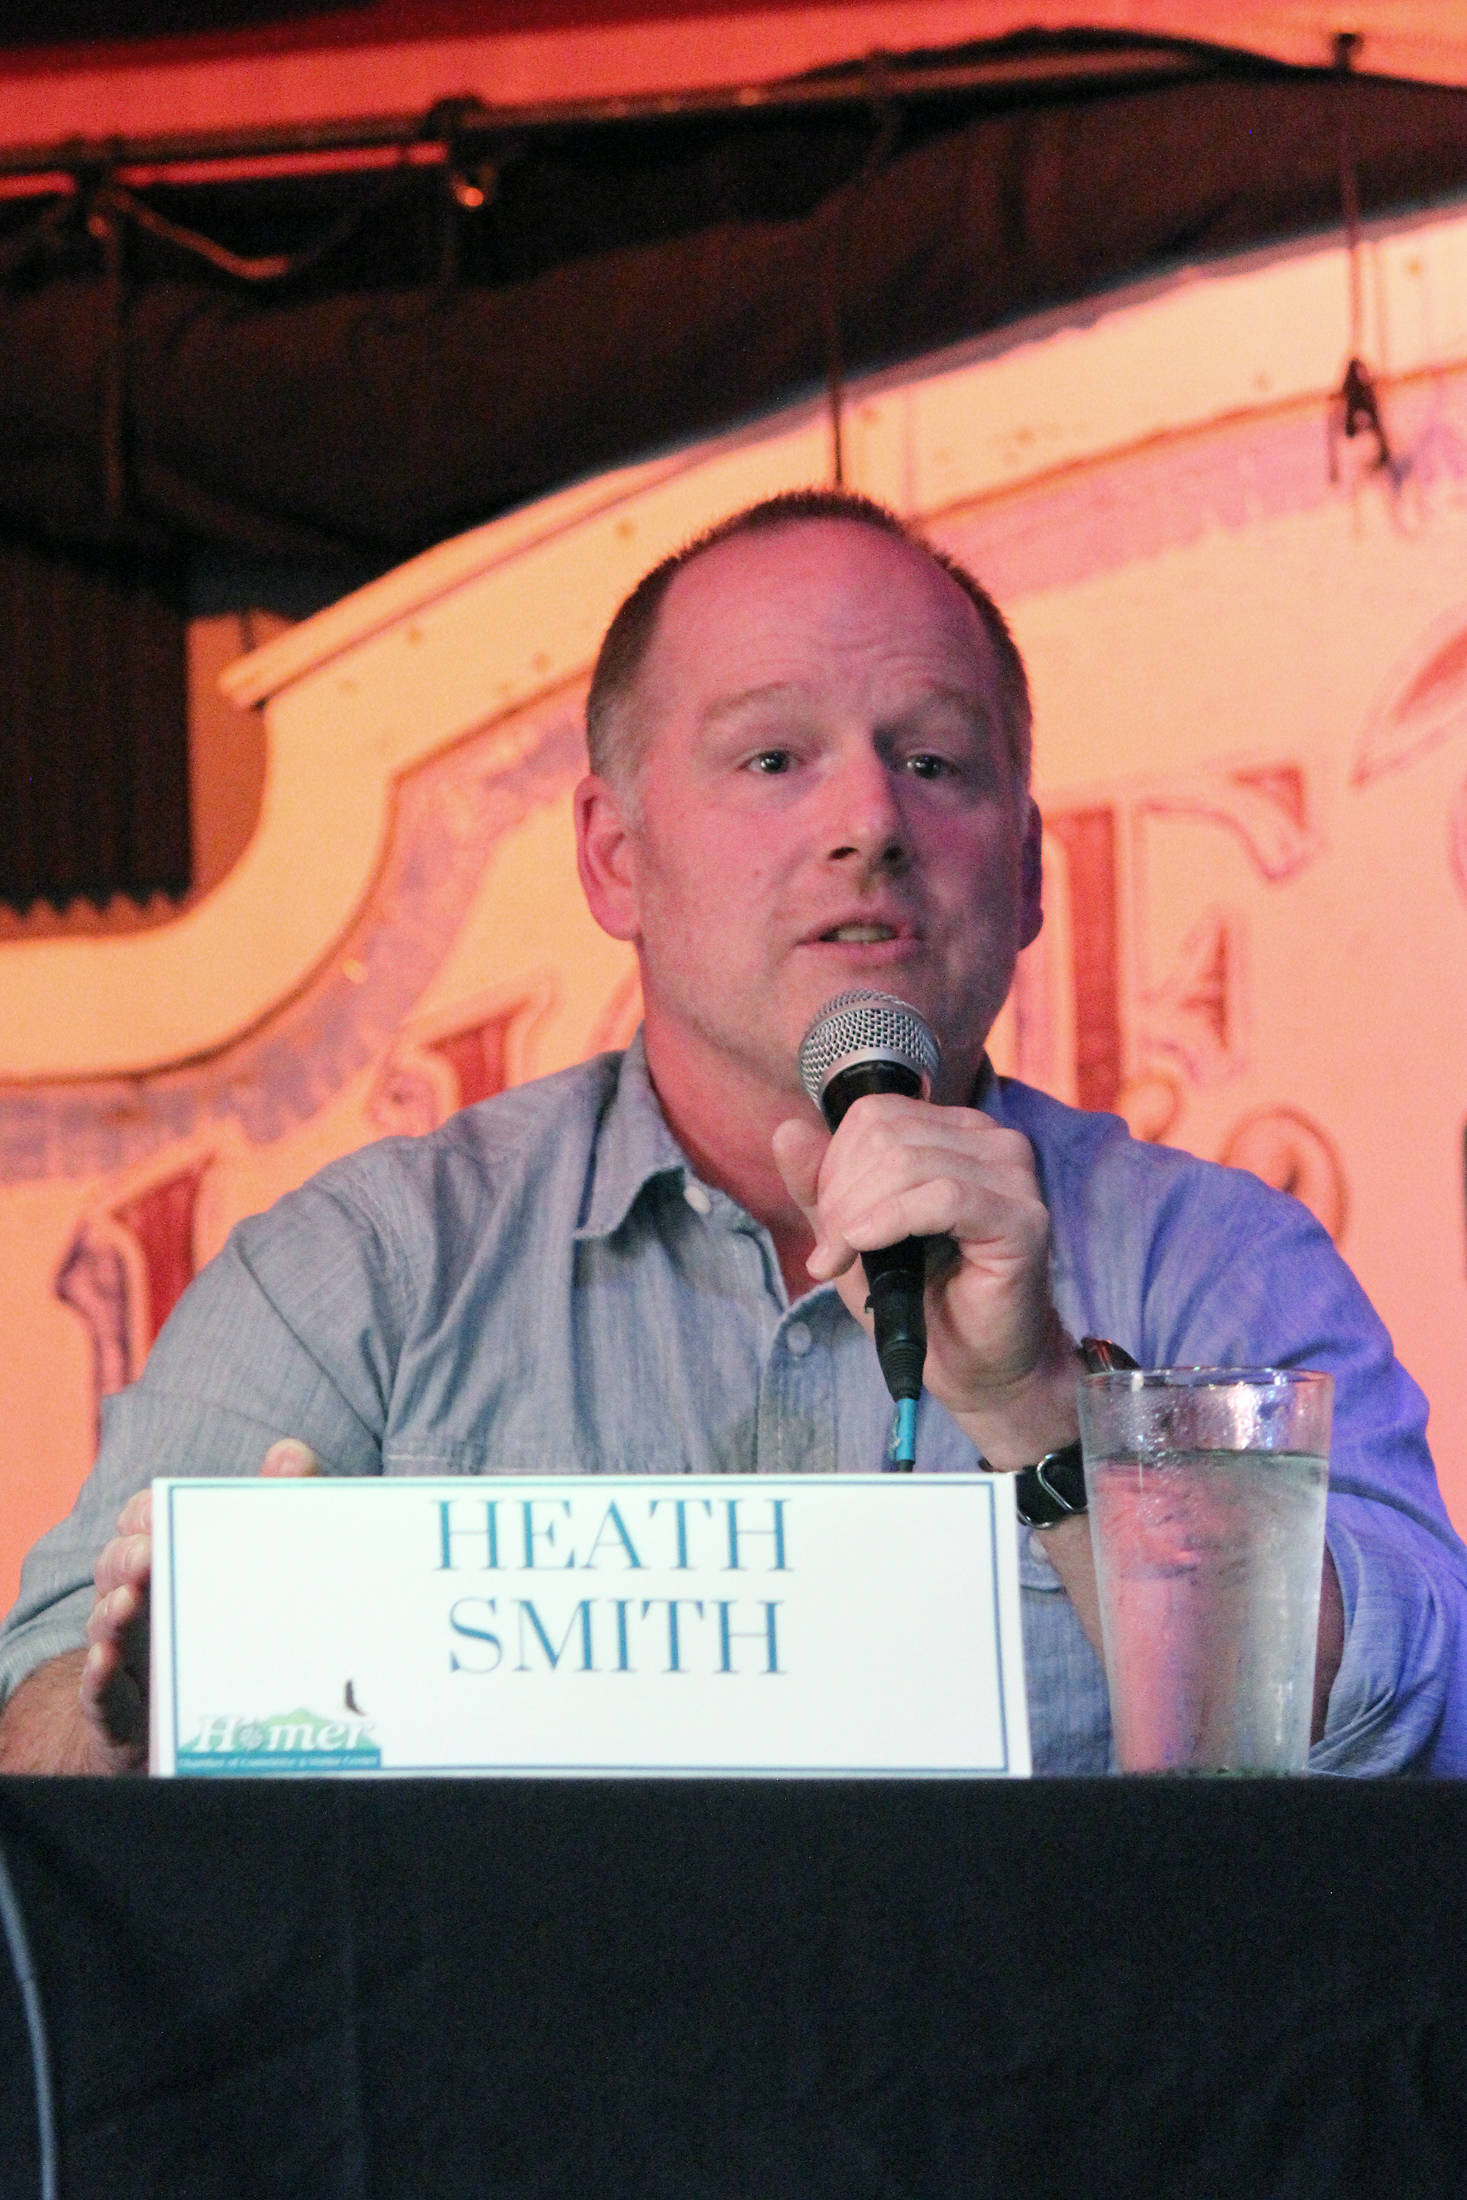 Homer City Council member Heath Smith answers a question during a candidate forum Tuesday, Sept. 11, 2018 at Alice’s Champagne Palace in Homer, Alaska. Hosted by the Homer Chamber of Commerce, the forum was for city council candidates and mayoral candidates. Smith is running for re-election in an uncontested council race. (Photo by Megan Pacer/Homer News)